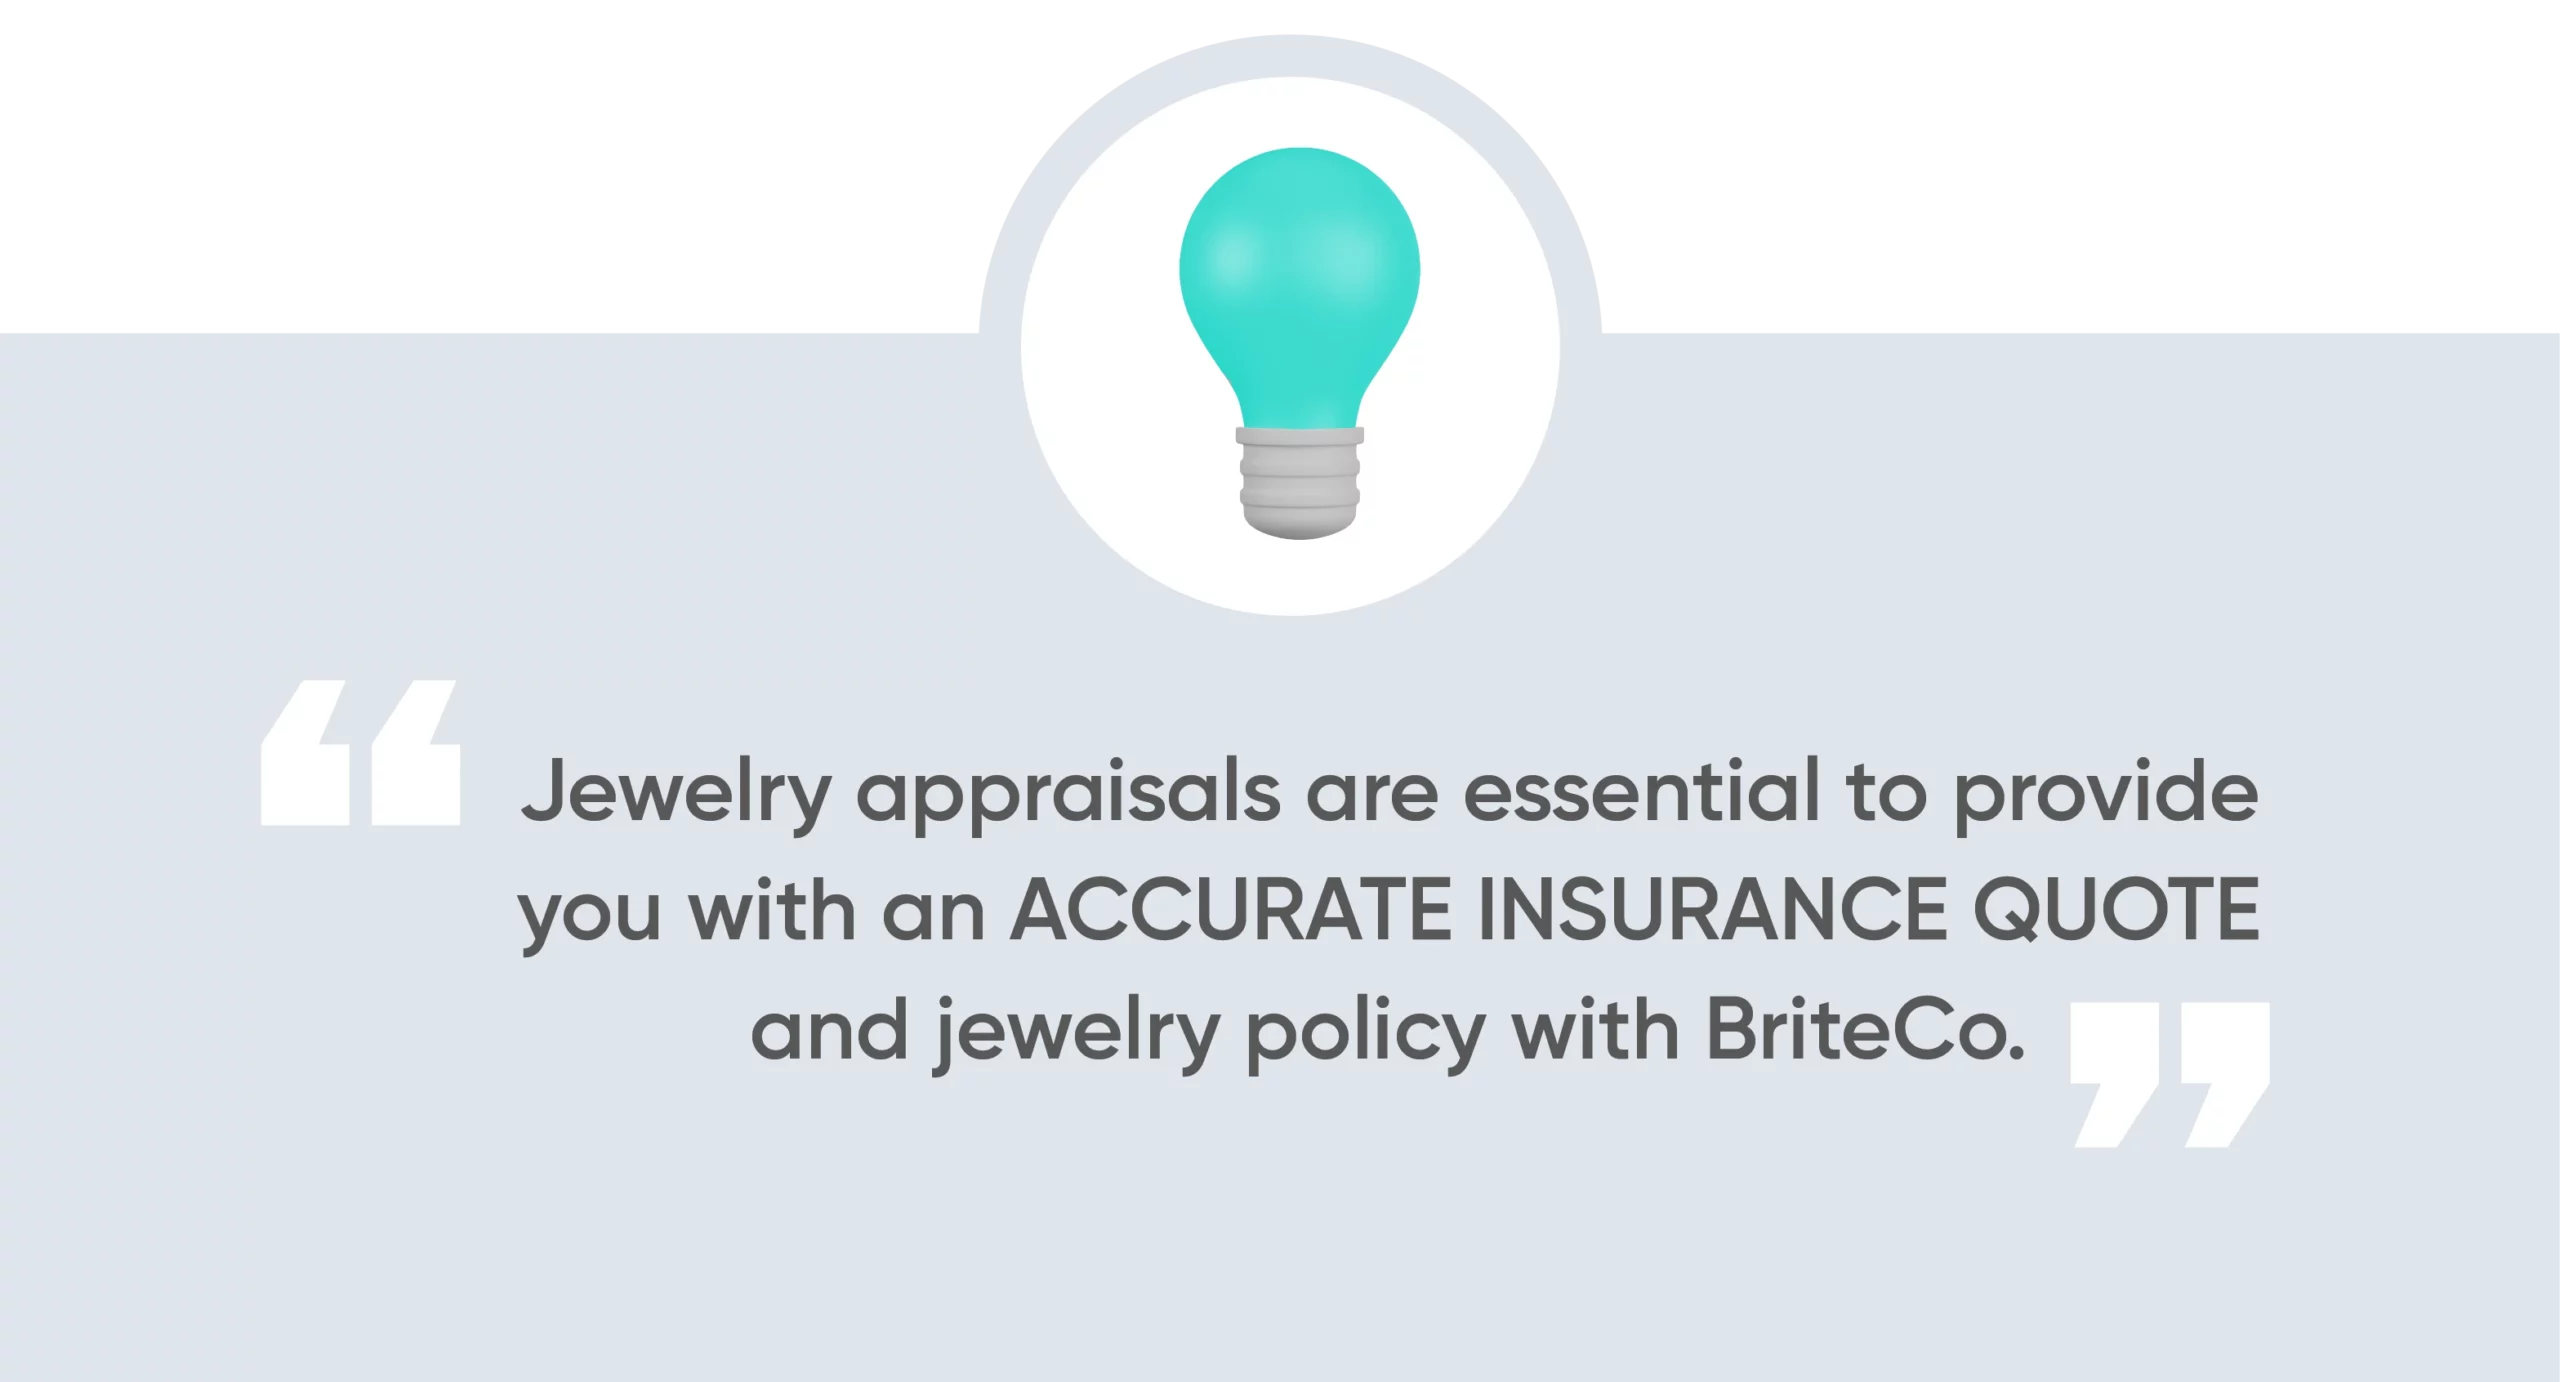 jewelry appraisals are essential when it comes to providing you with an accurate insurance quote for a jewelry policy.